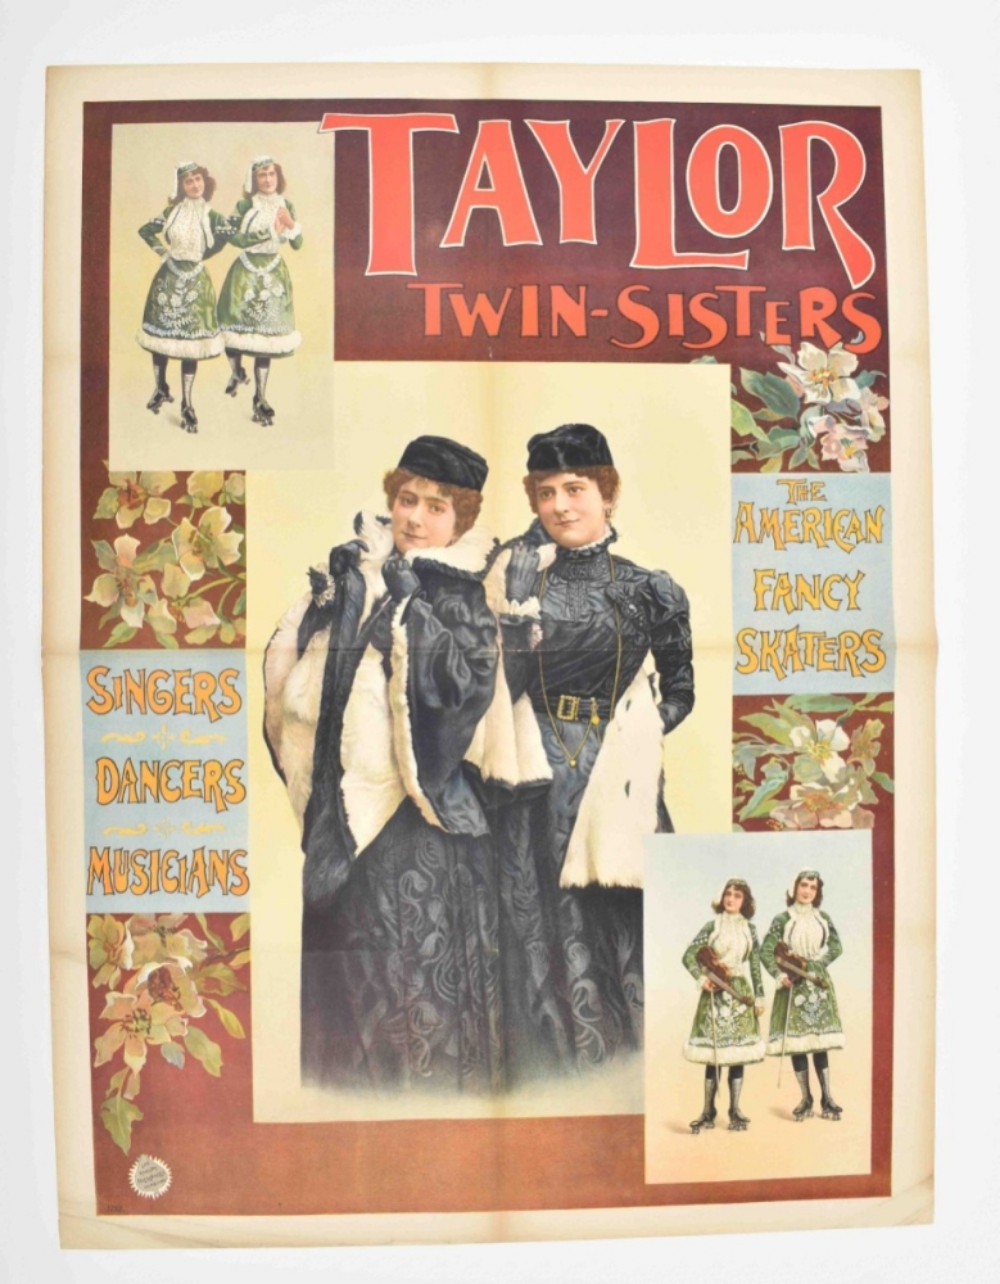 [Roller skating] Taylor twin-sisters - Image 7 of 8